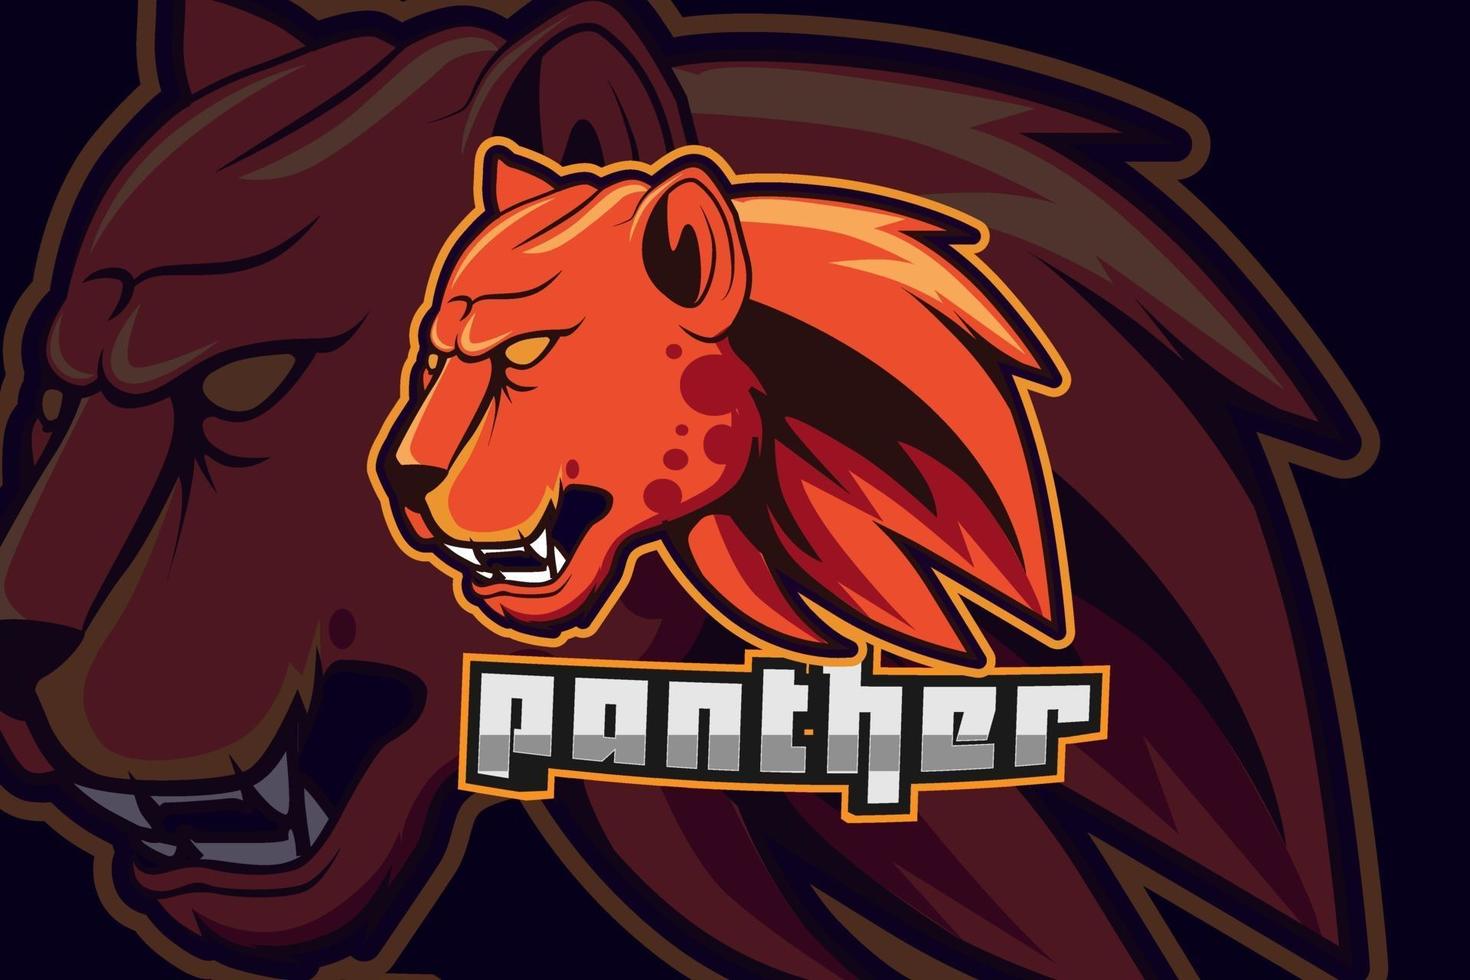 panther e-sports team logo template vector